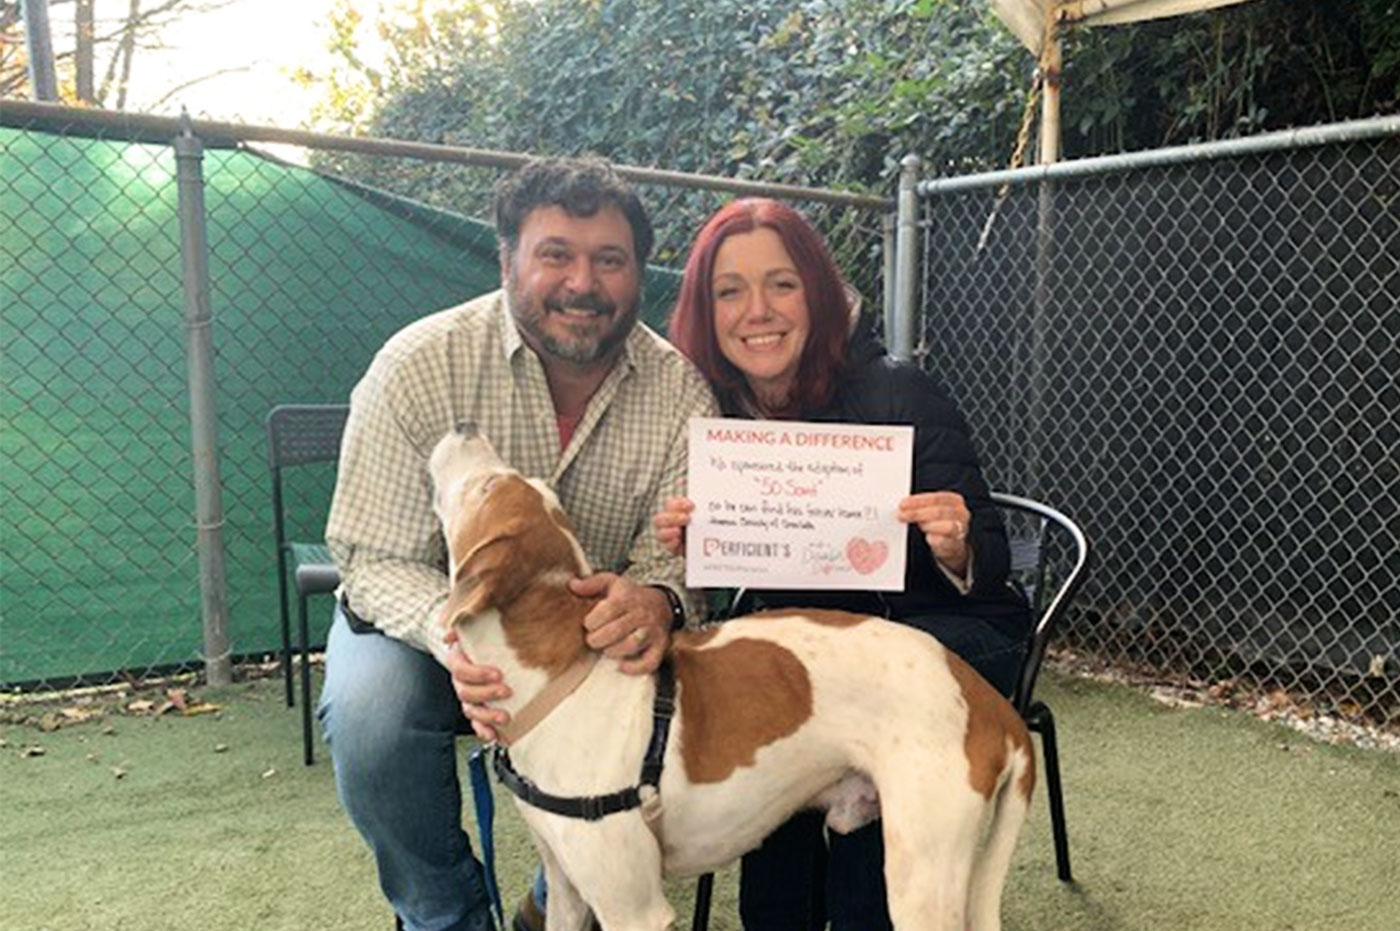 A colleague and his wife with a dog and holding a MADD sign for dog adoptions.